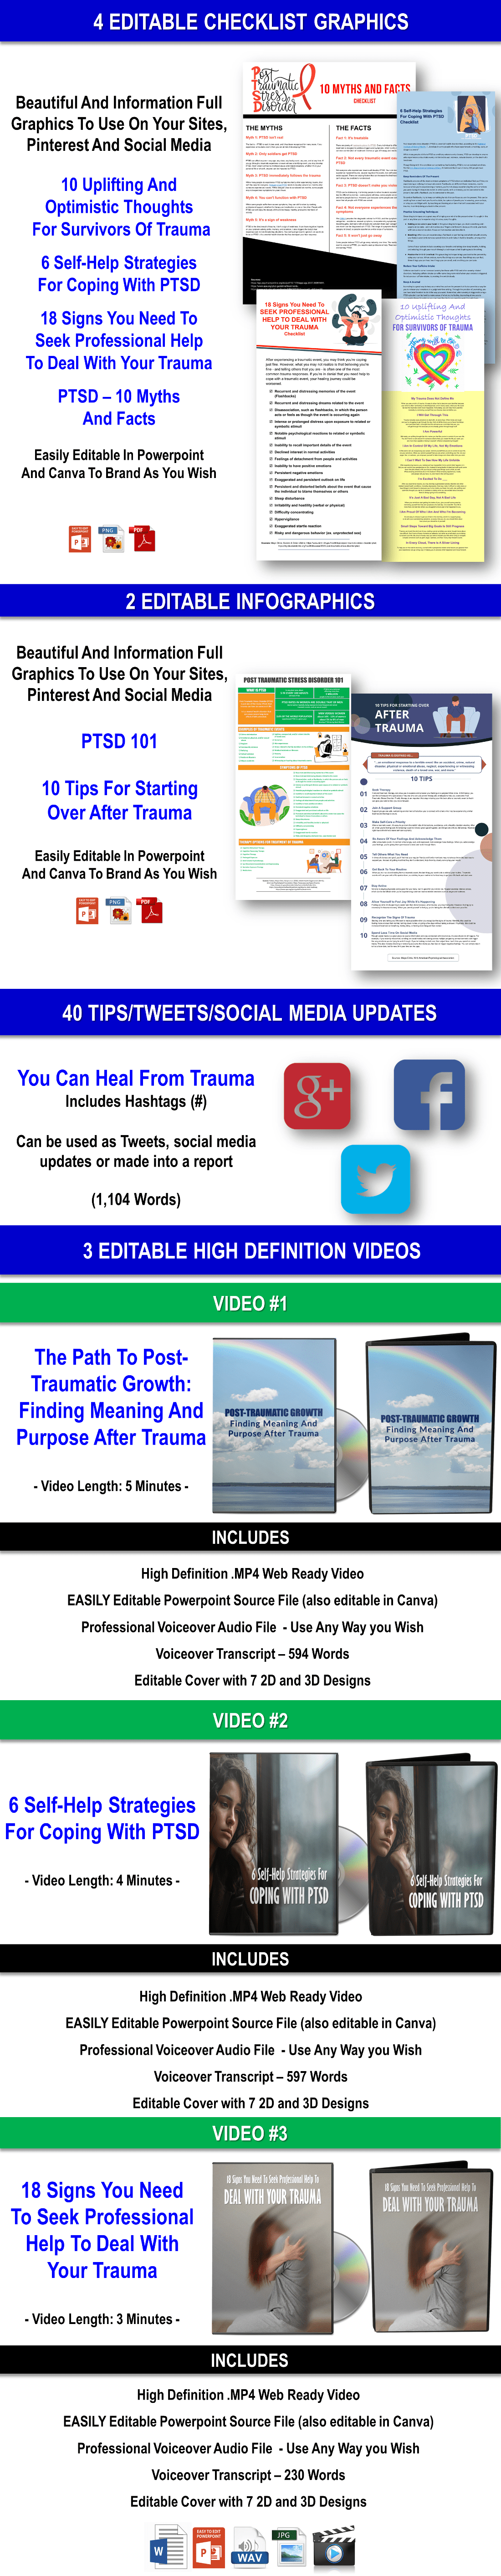 Understanding Trauma – The Complete Guide Content Pack with PLR Rights